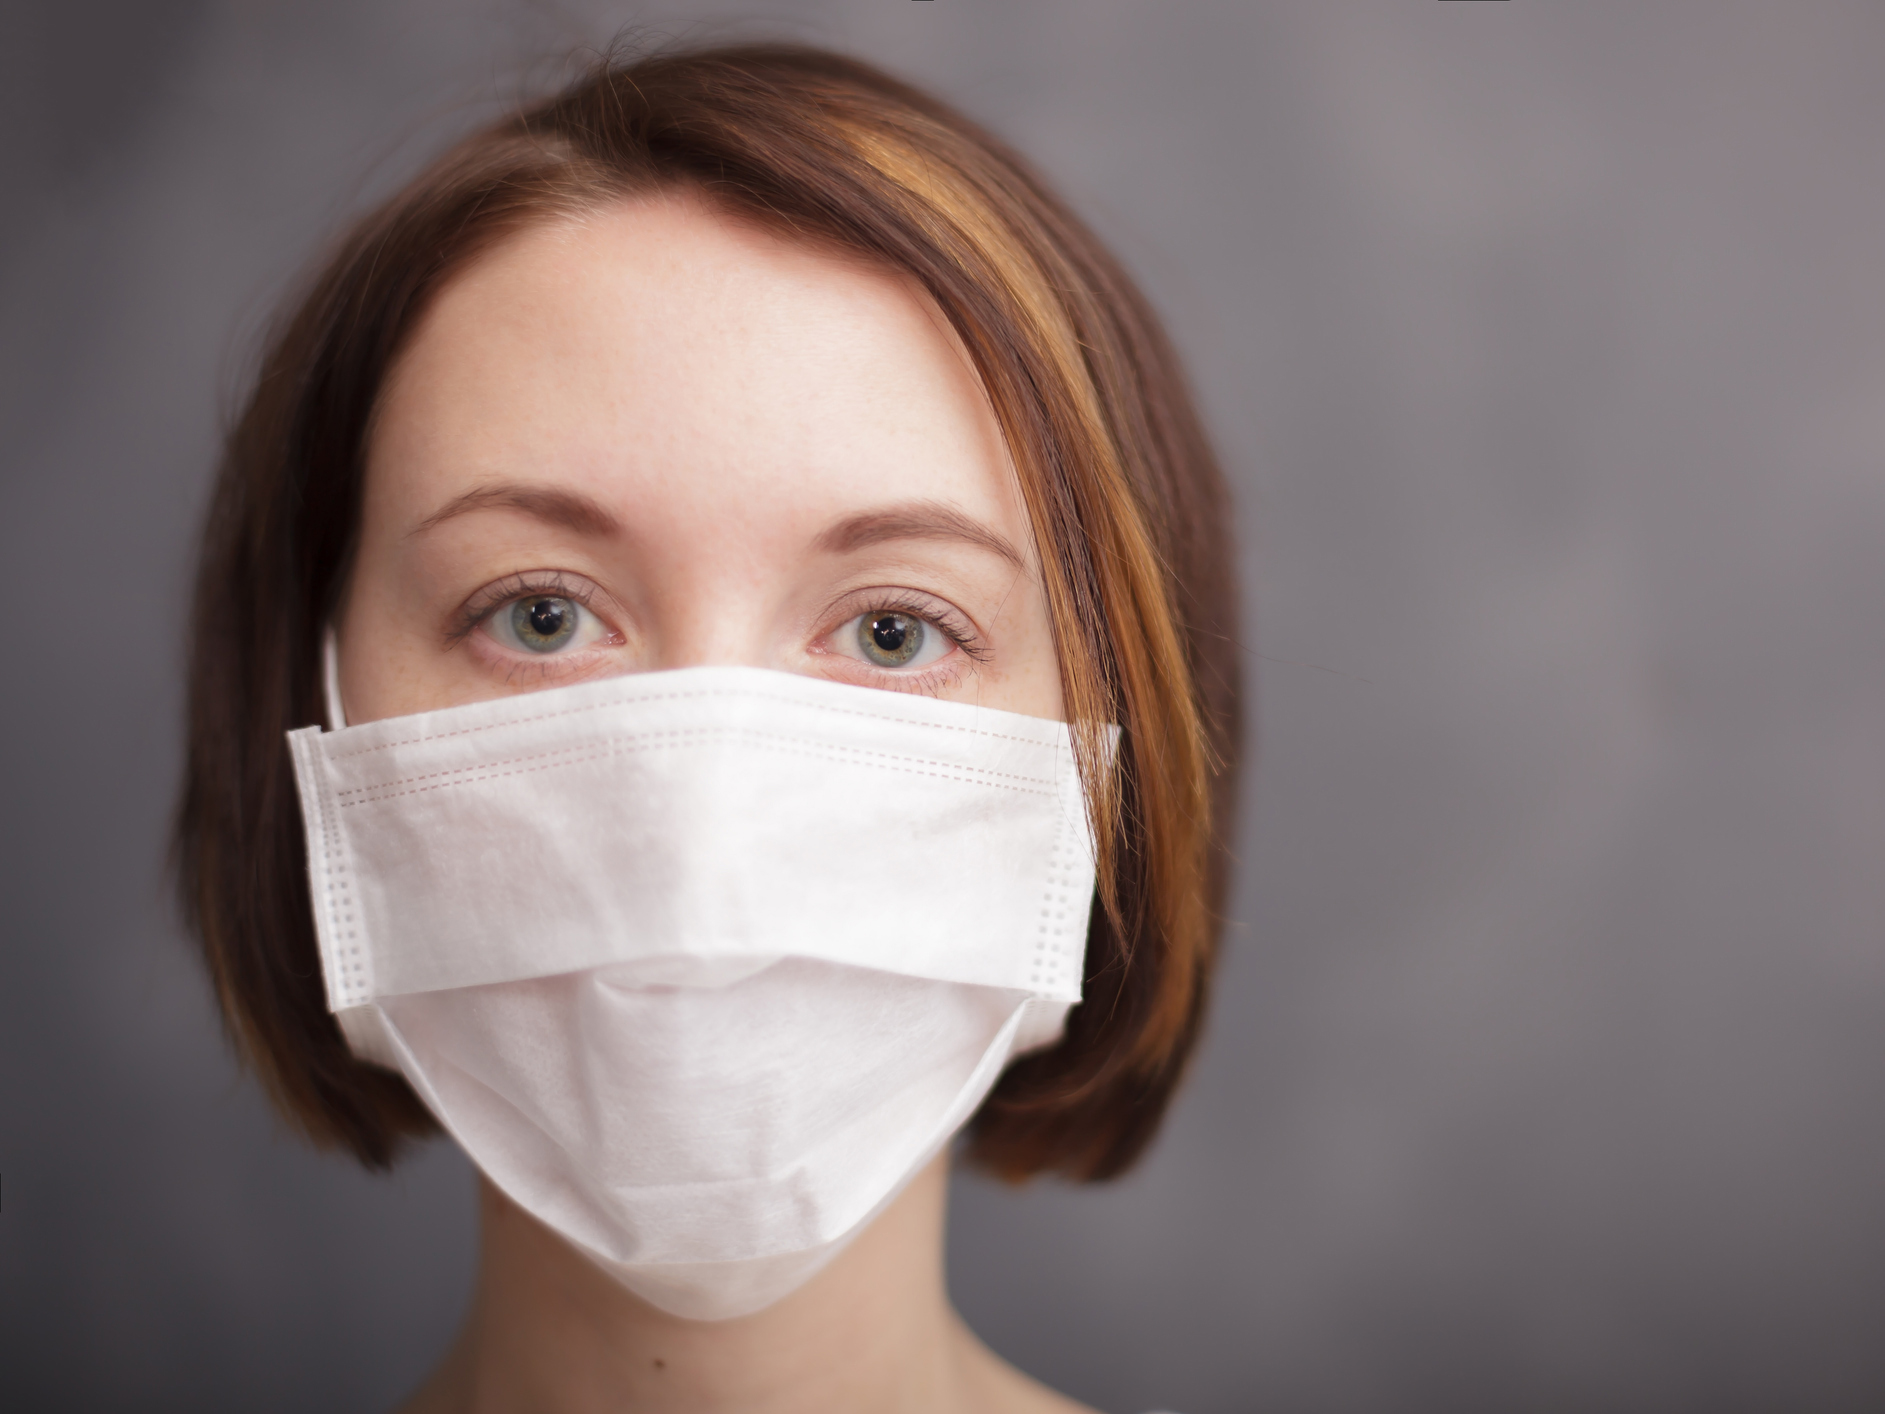 Coronavirus: When a mask makes sense and when it doesn’t